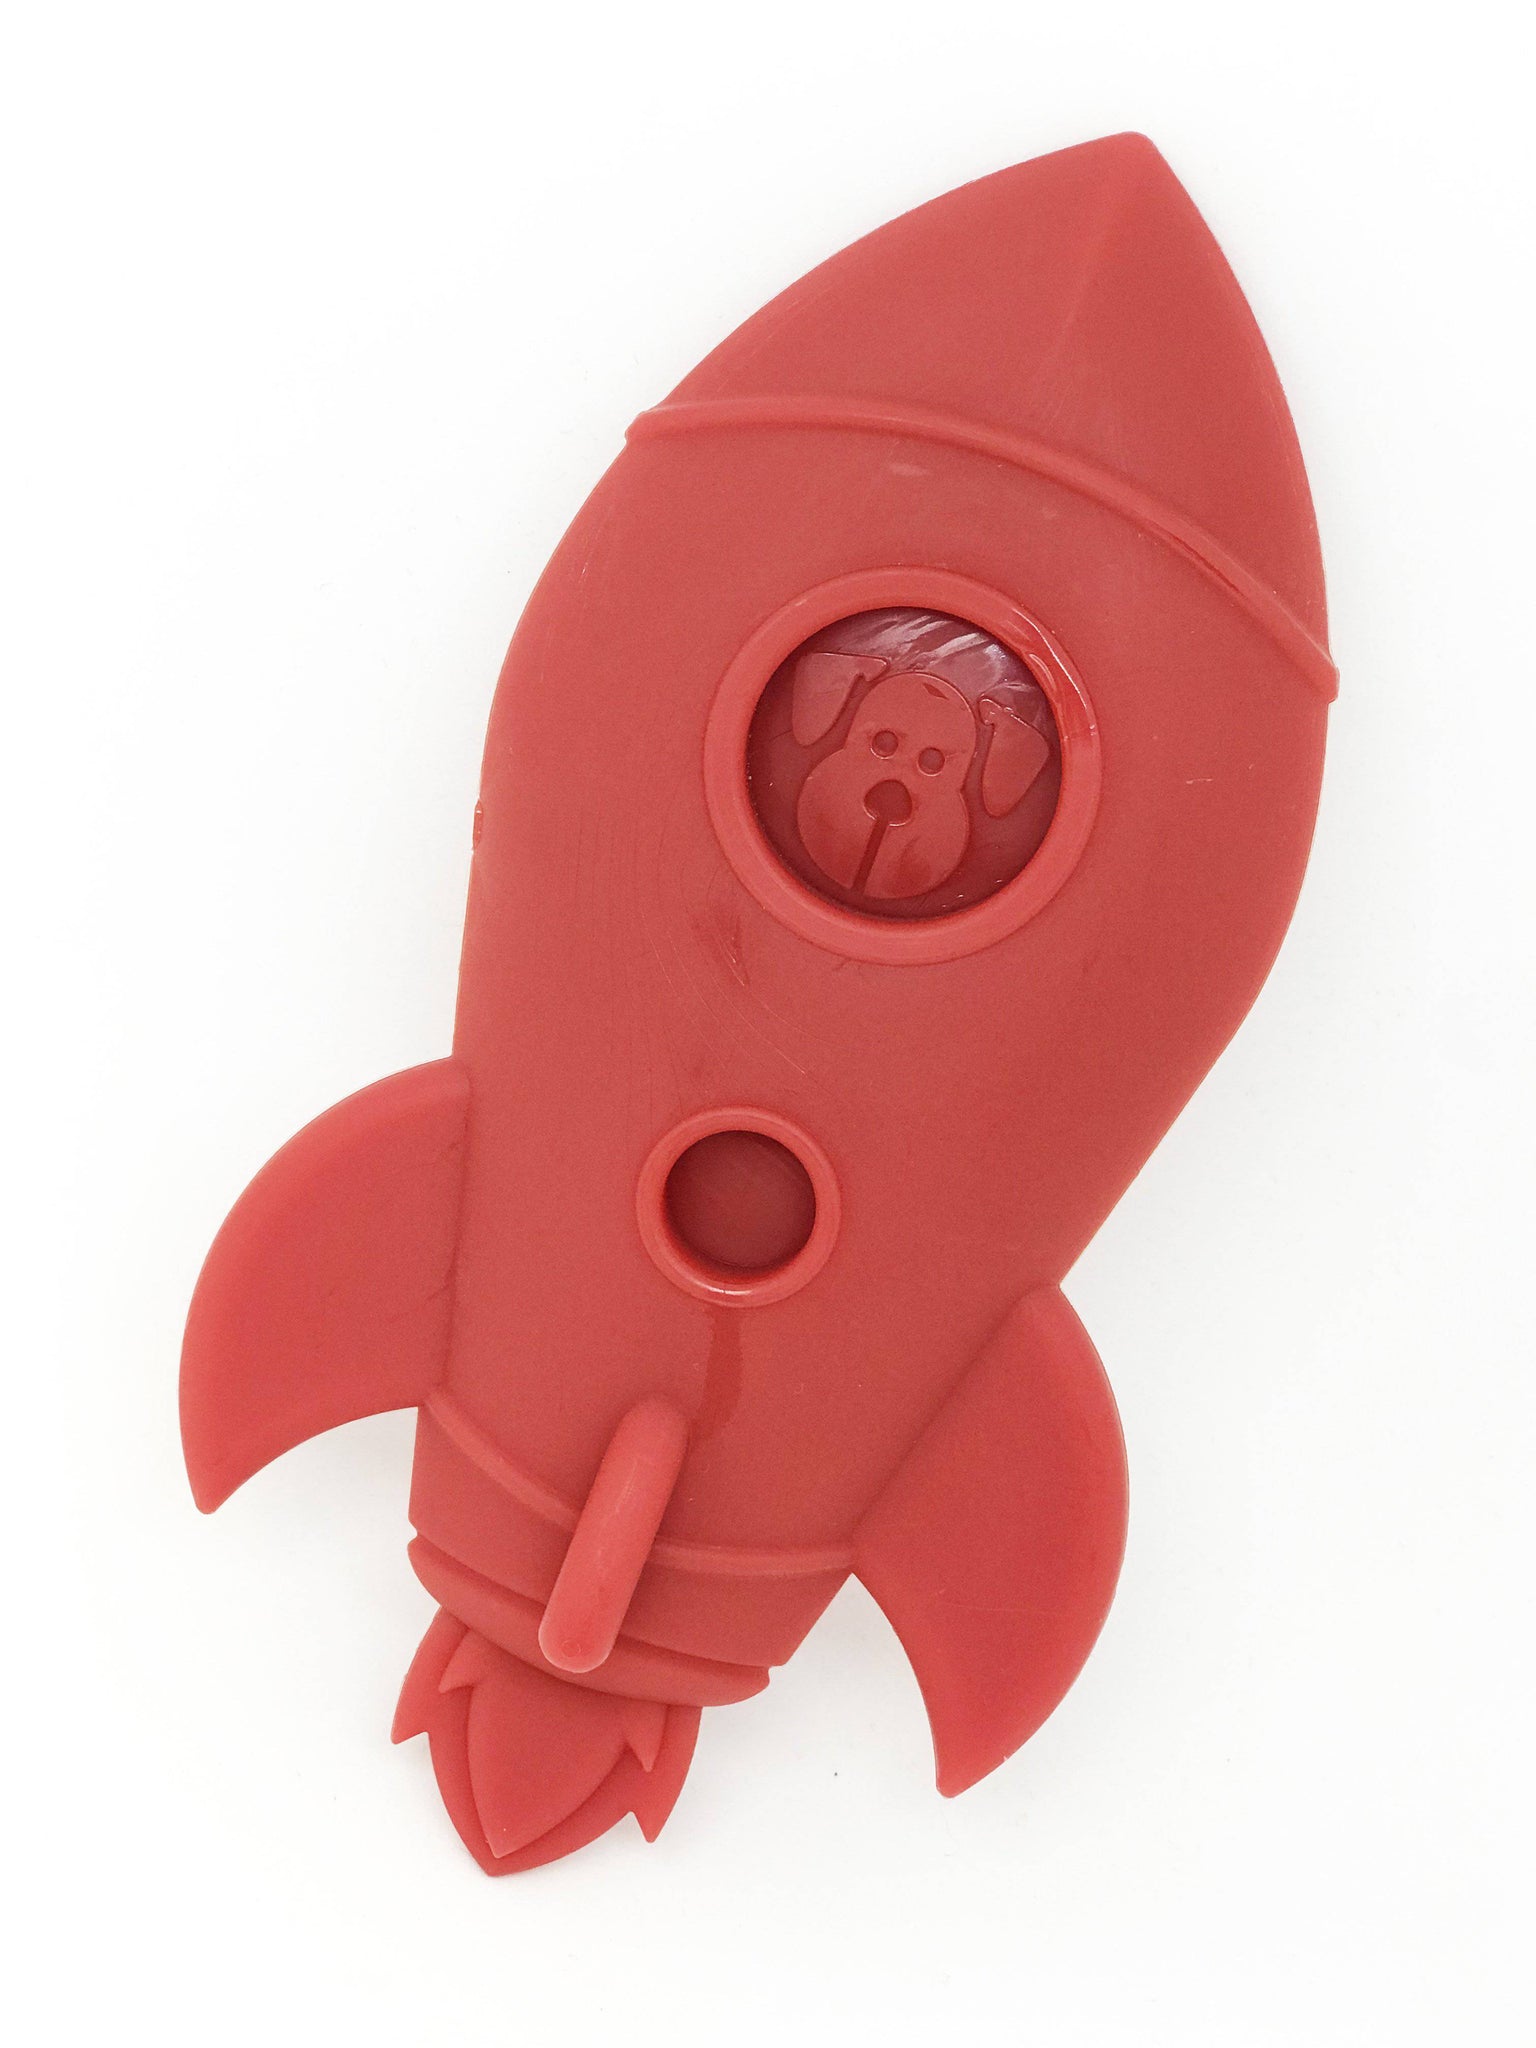 Spotnik Rocket Ship Ultra Durable Nylon Dog Chew Toy for Aggressive Chewers - Red - Rocket Ship Nylon Chew Toy